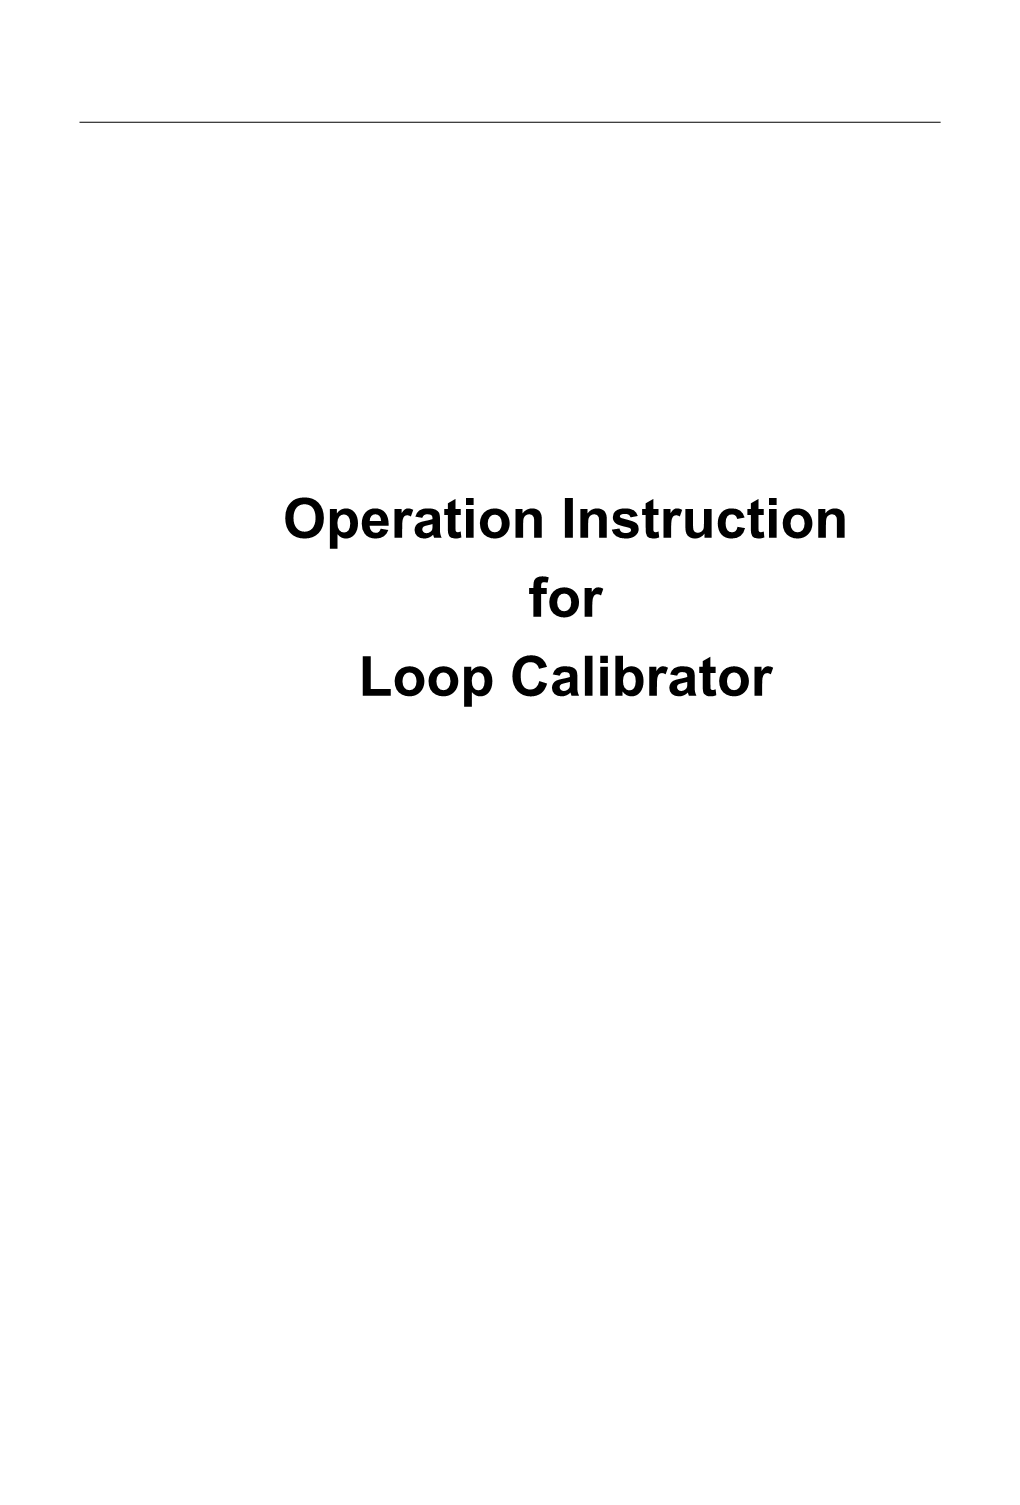 Operation Instruction for Loop Calibrator